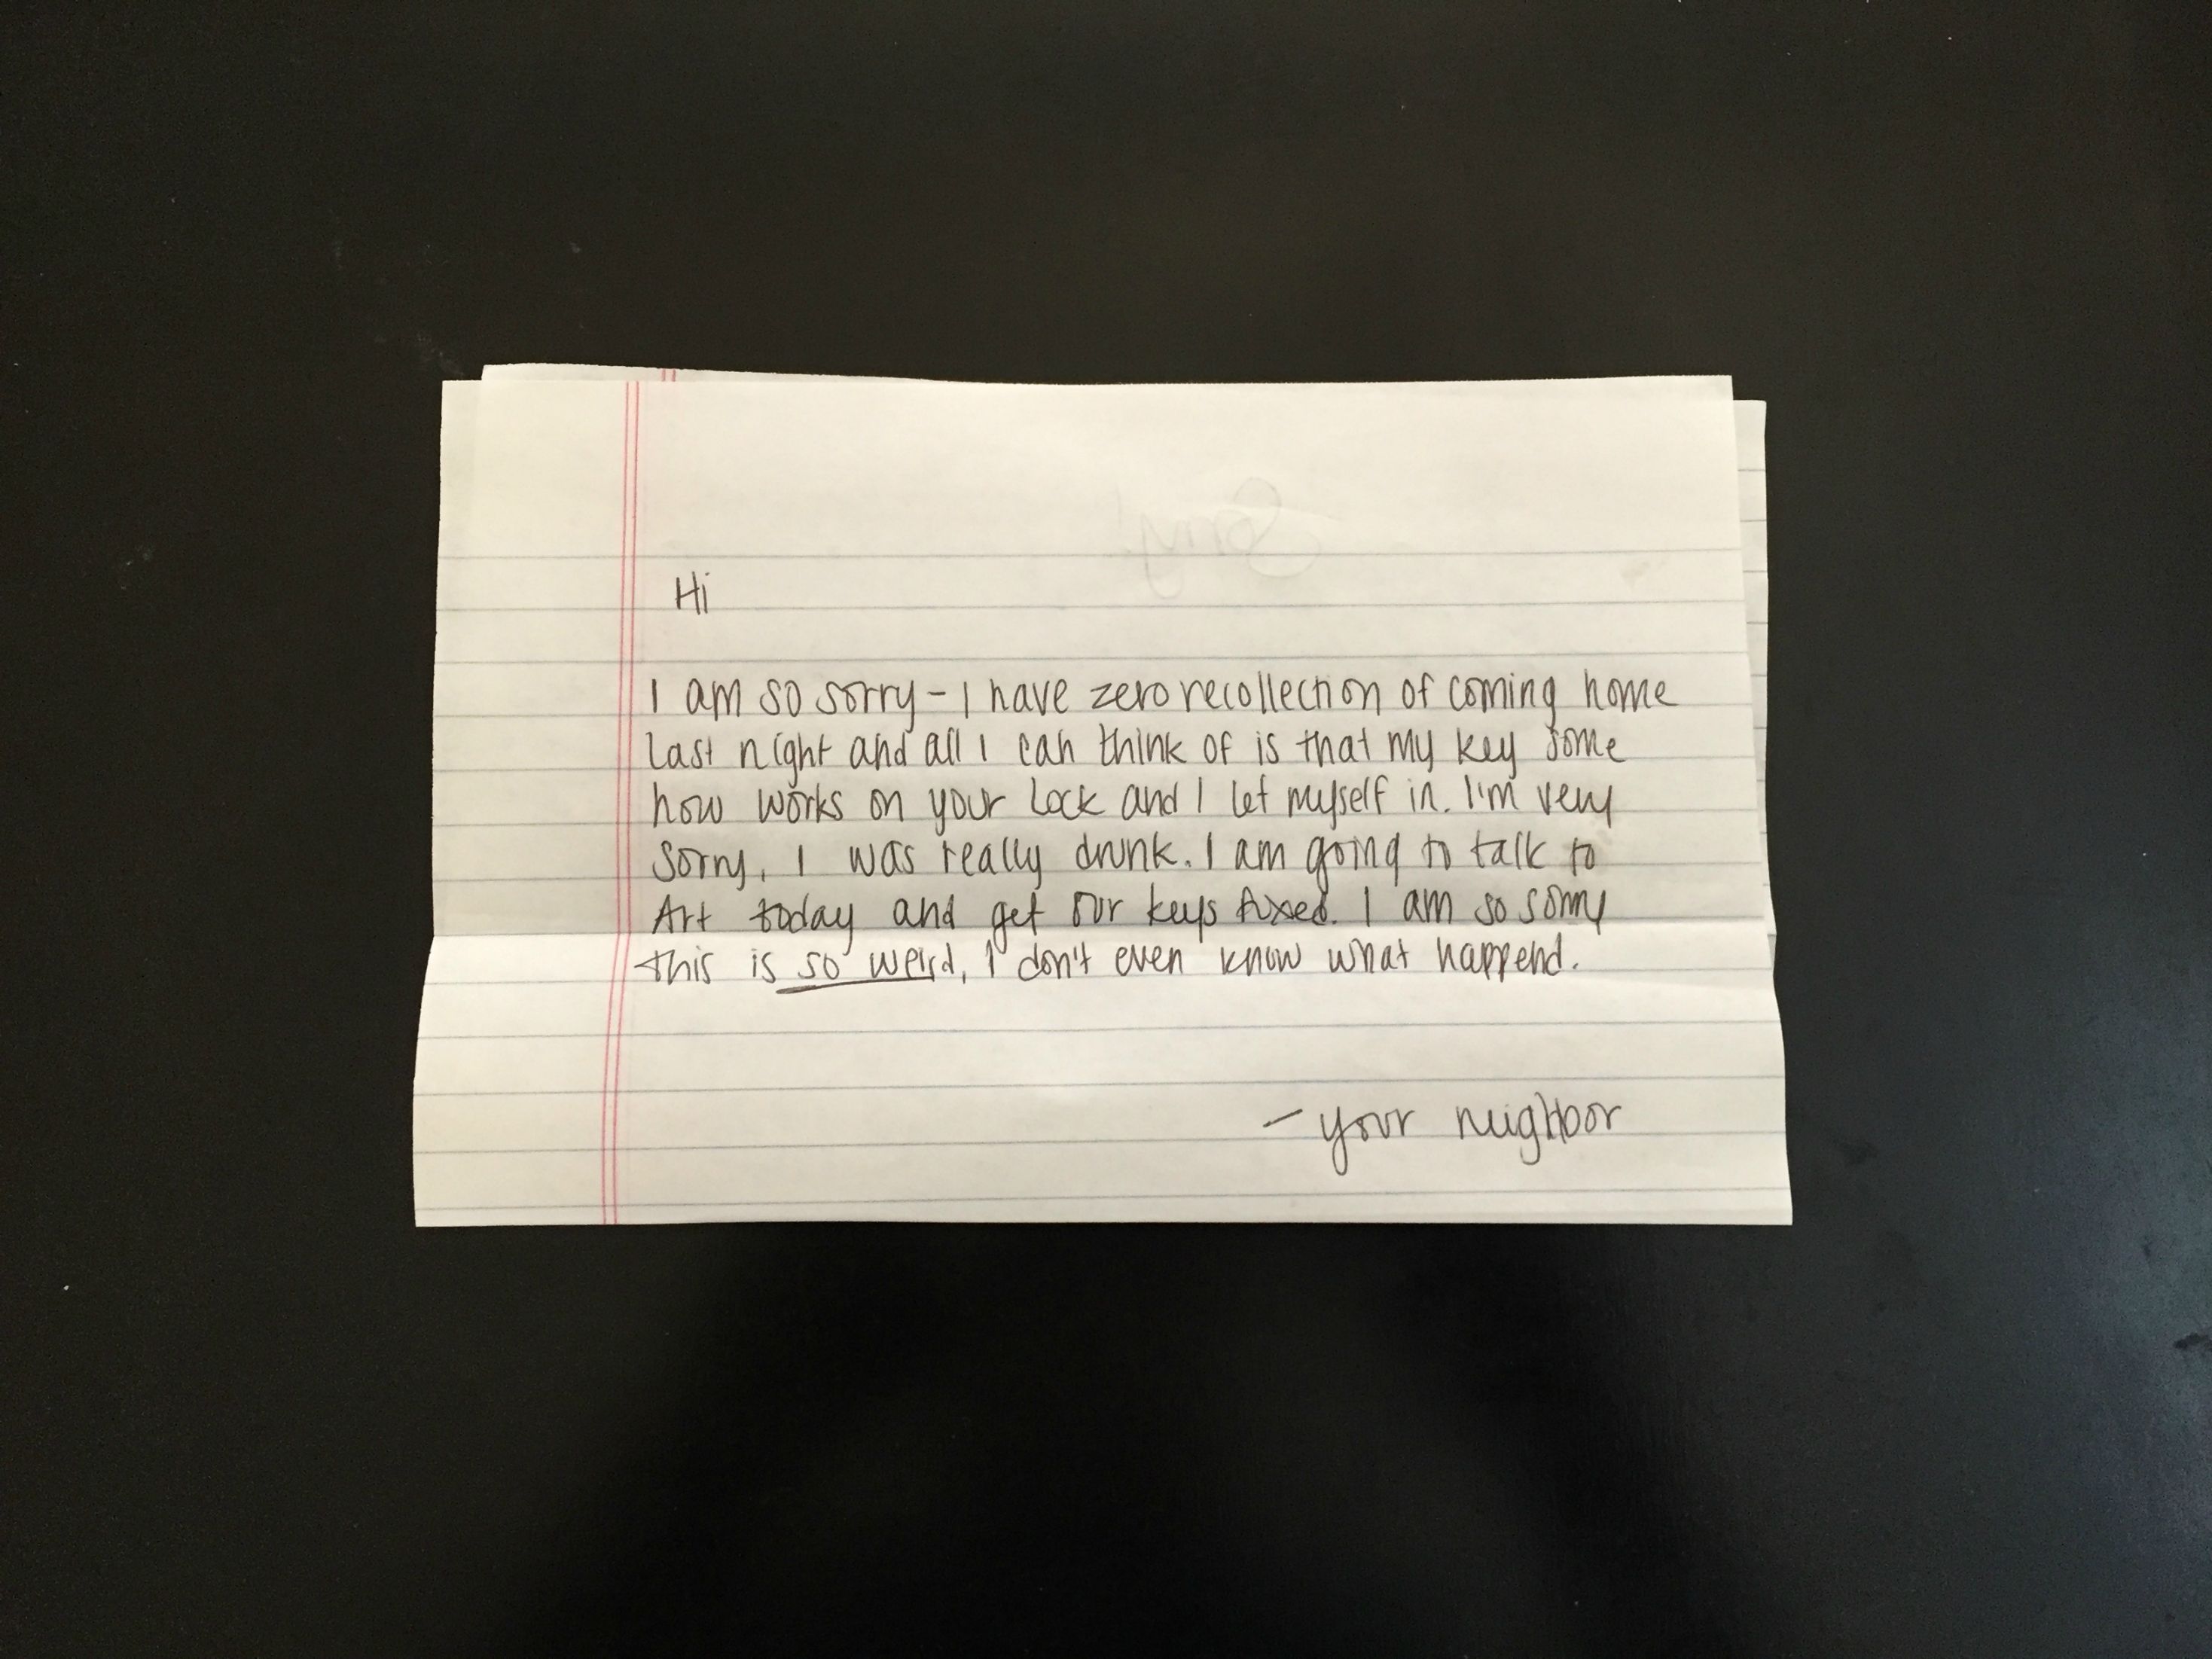 12 Notes Left by Seriously Awesome Neighbors